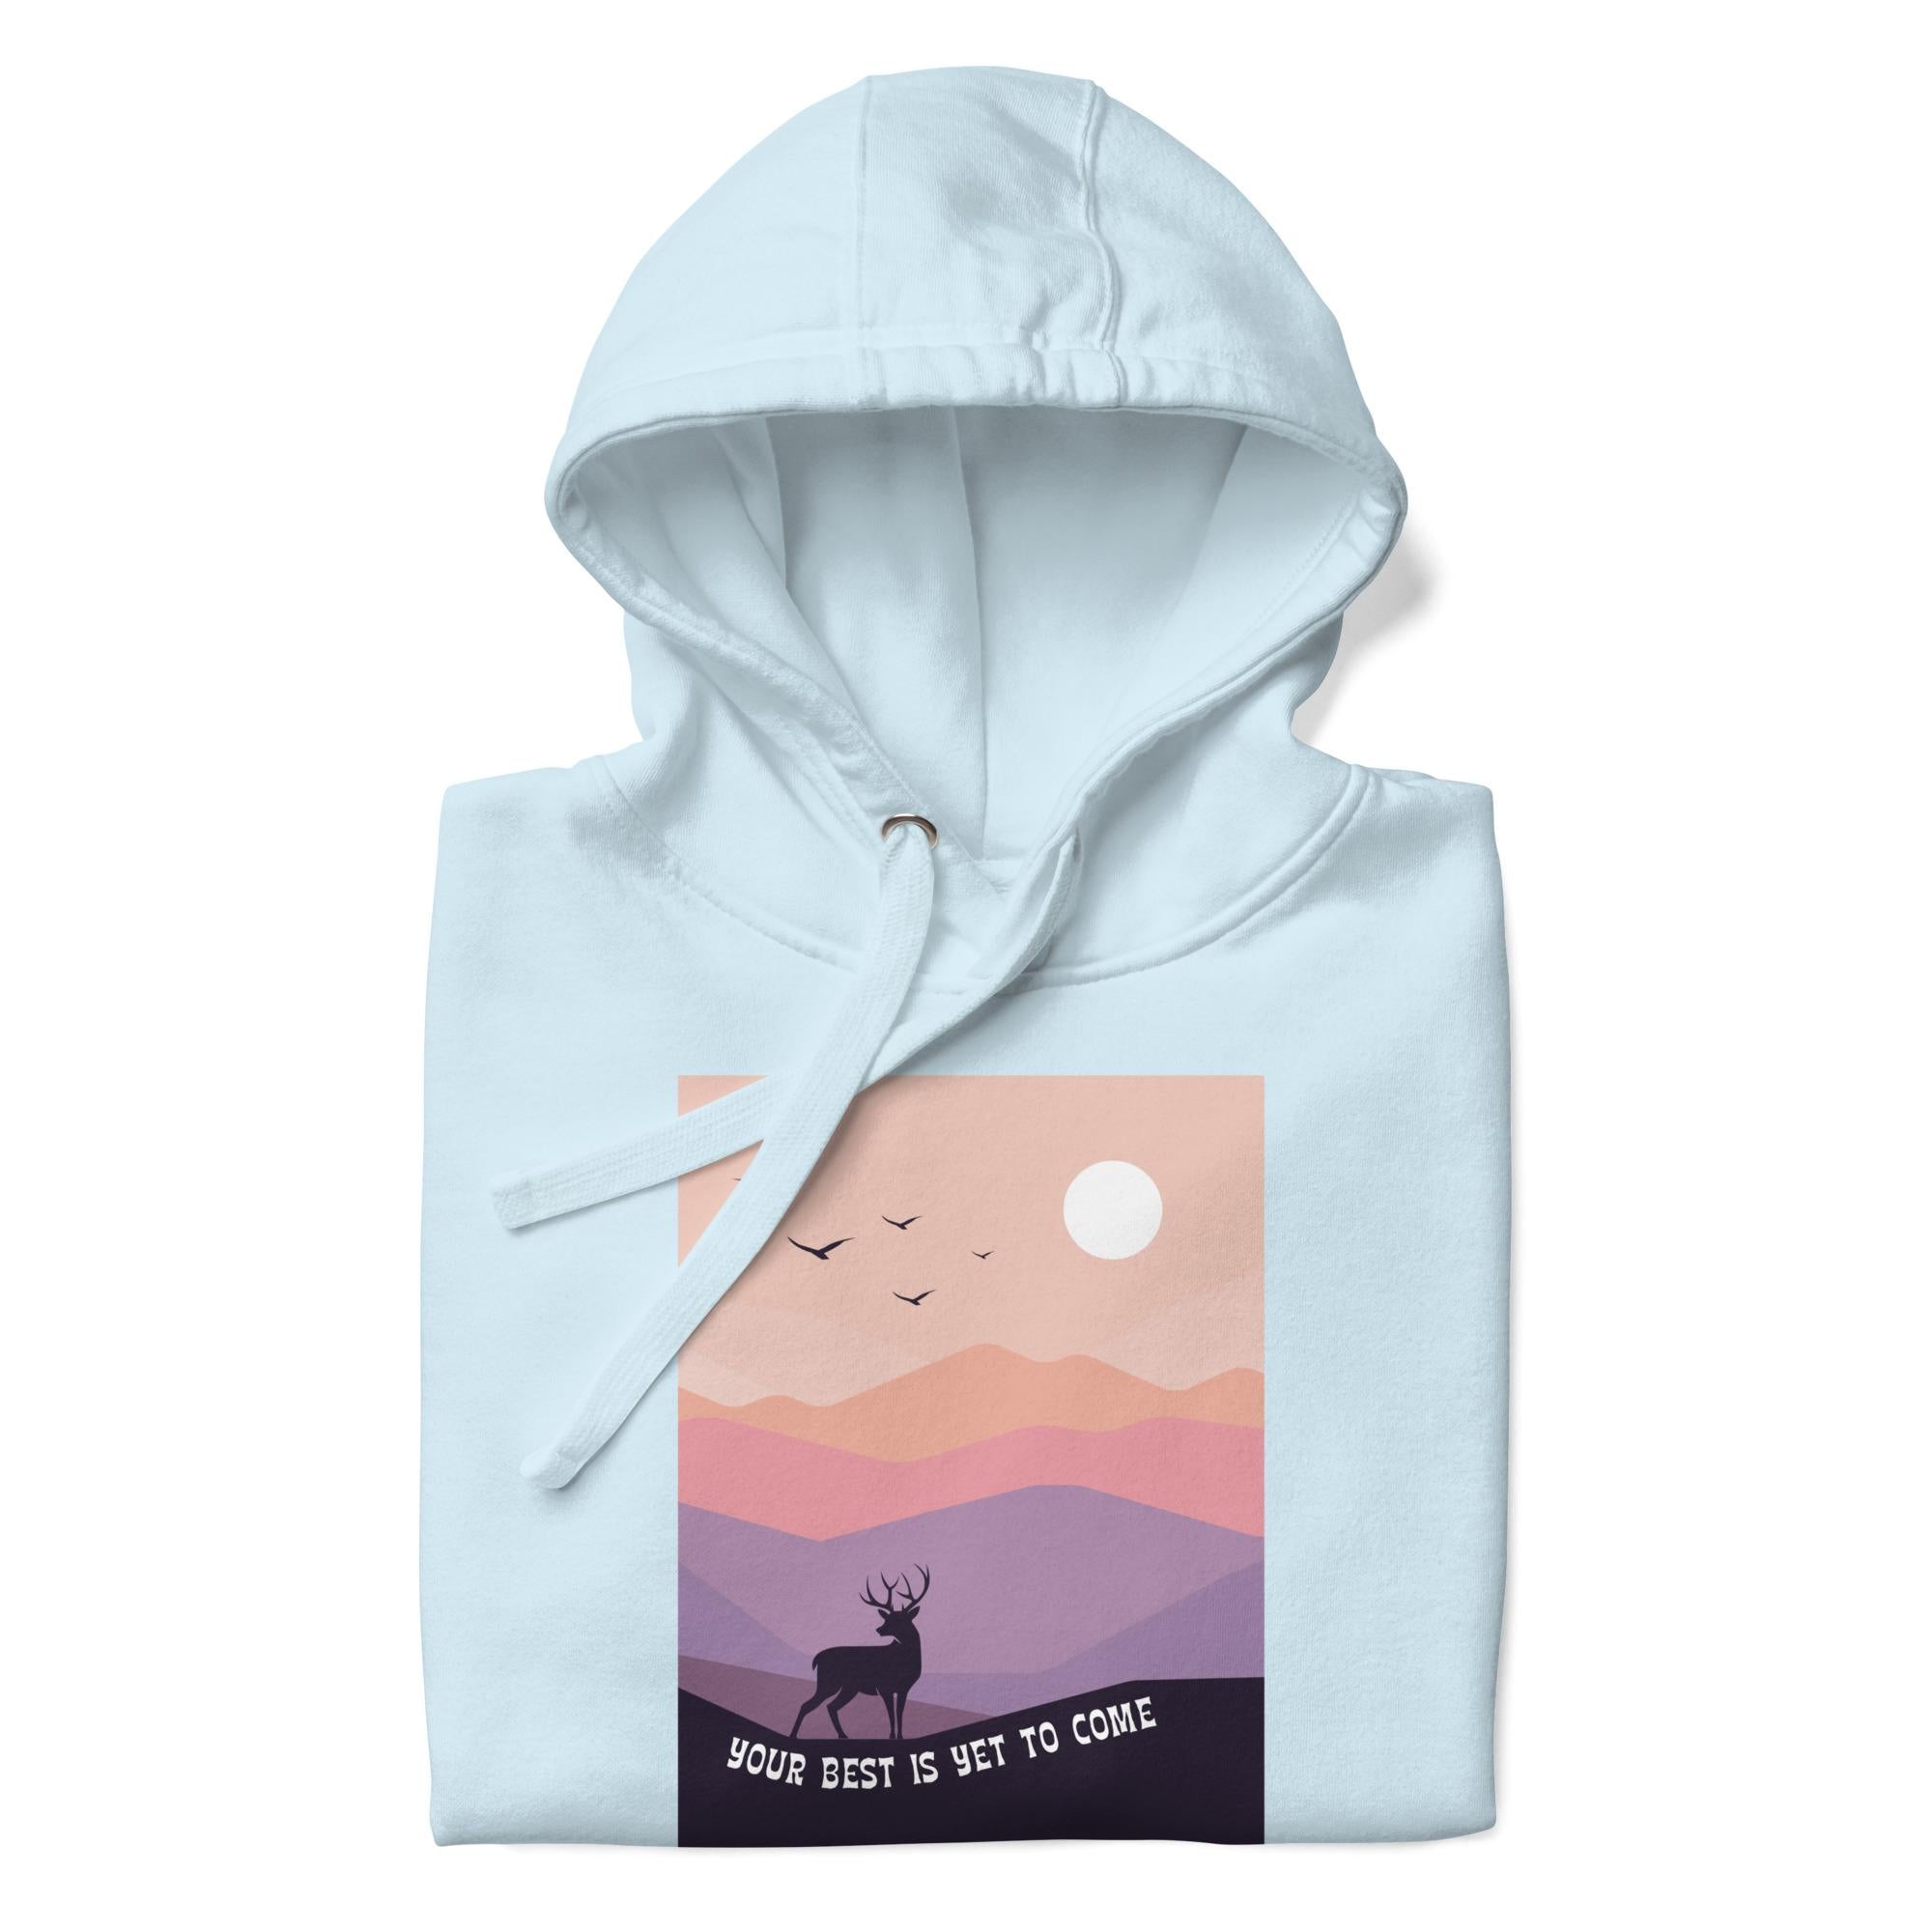 Deer Hoodie in Sky Blue – Premium Wildlife Animal Inspirational Hoodie Design with Your Best Is Yet To Come text, part of Wildlife Hoodies & Clothing from Forever Wildlife